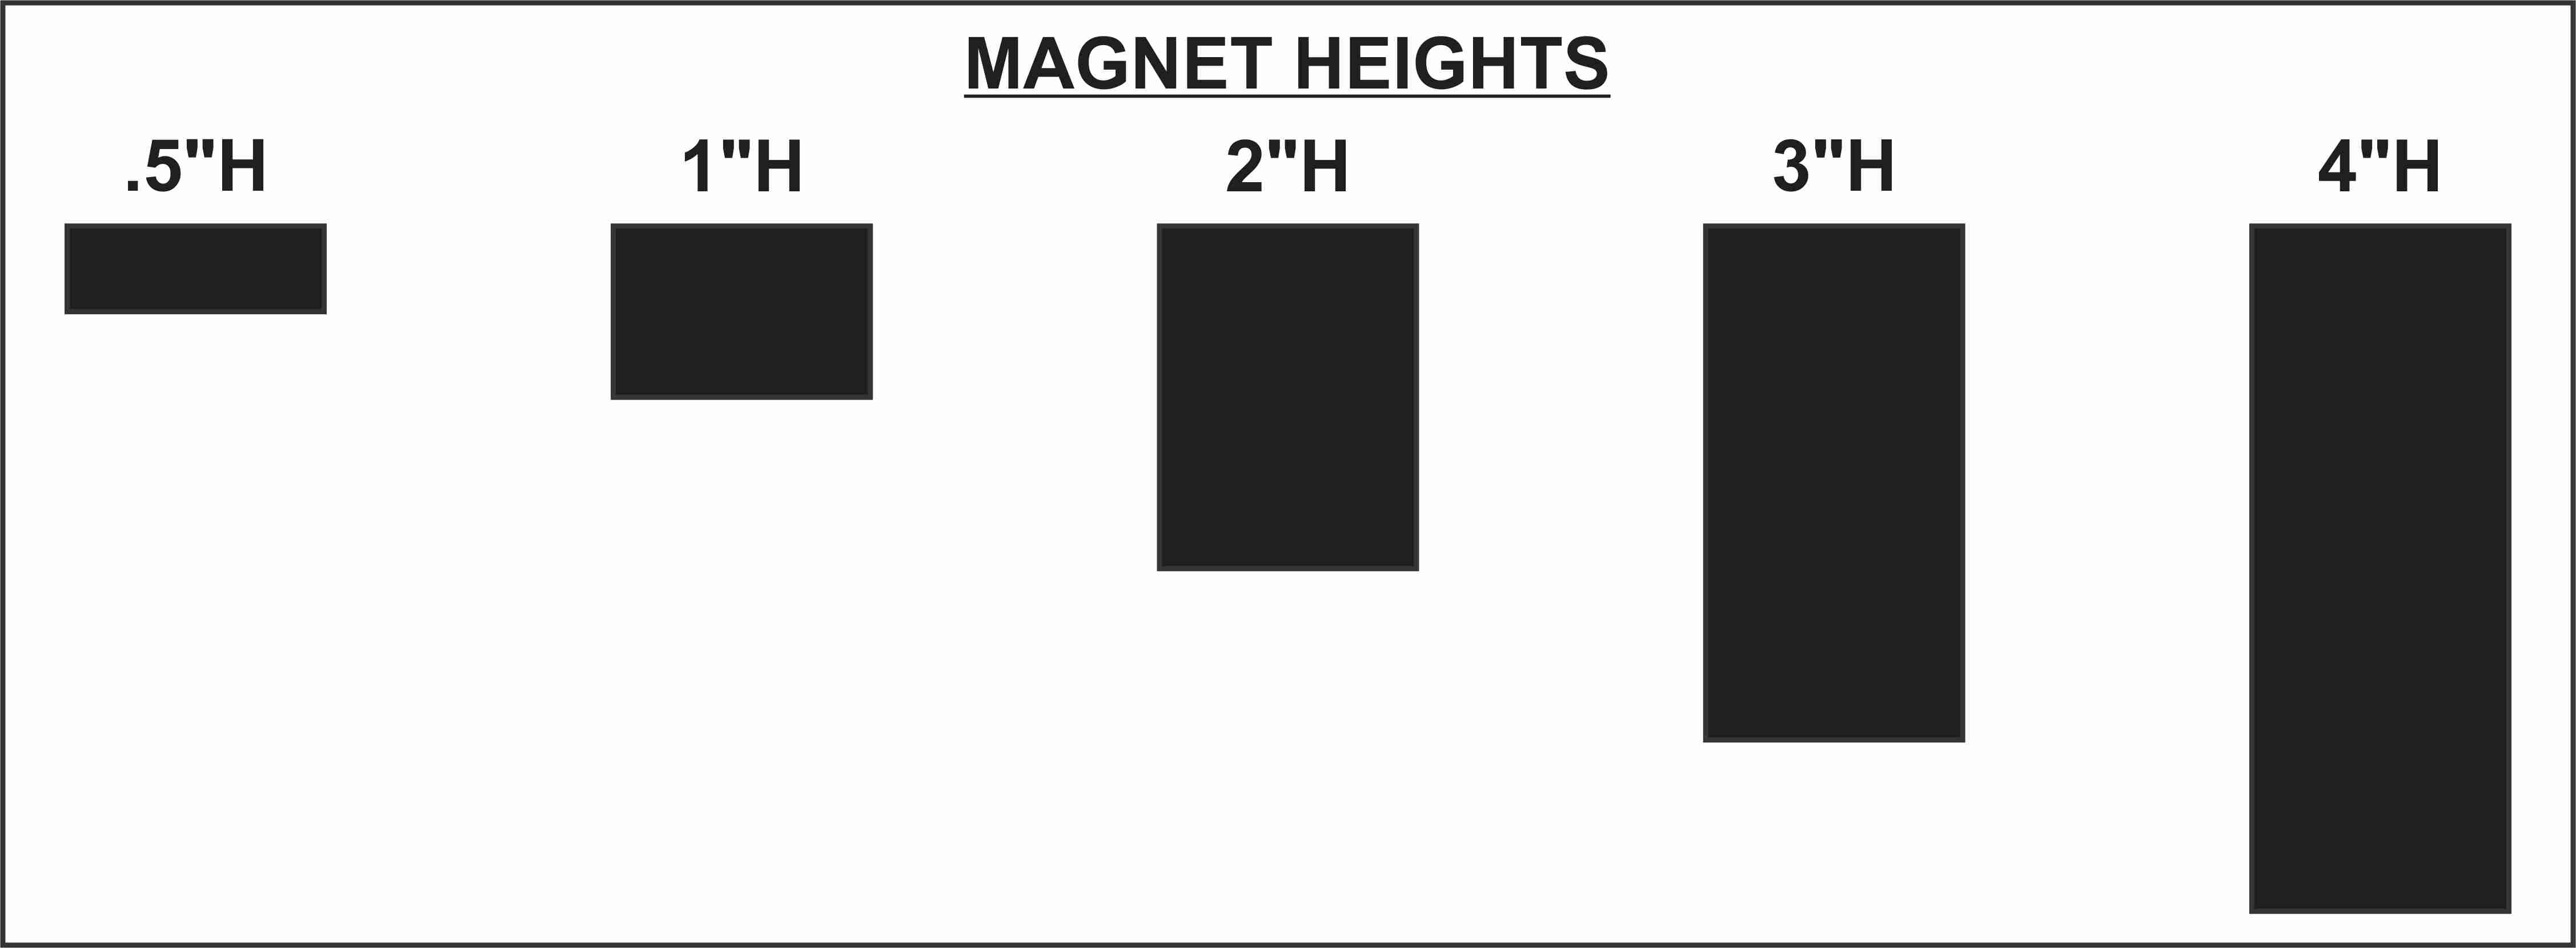 3m double sided magnets